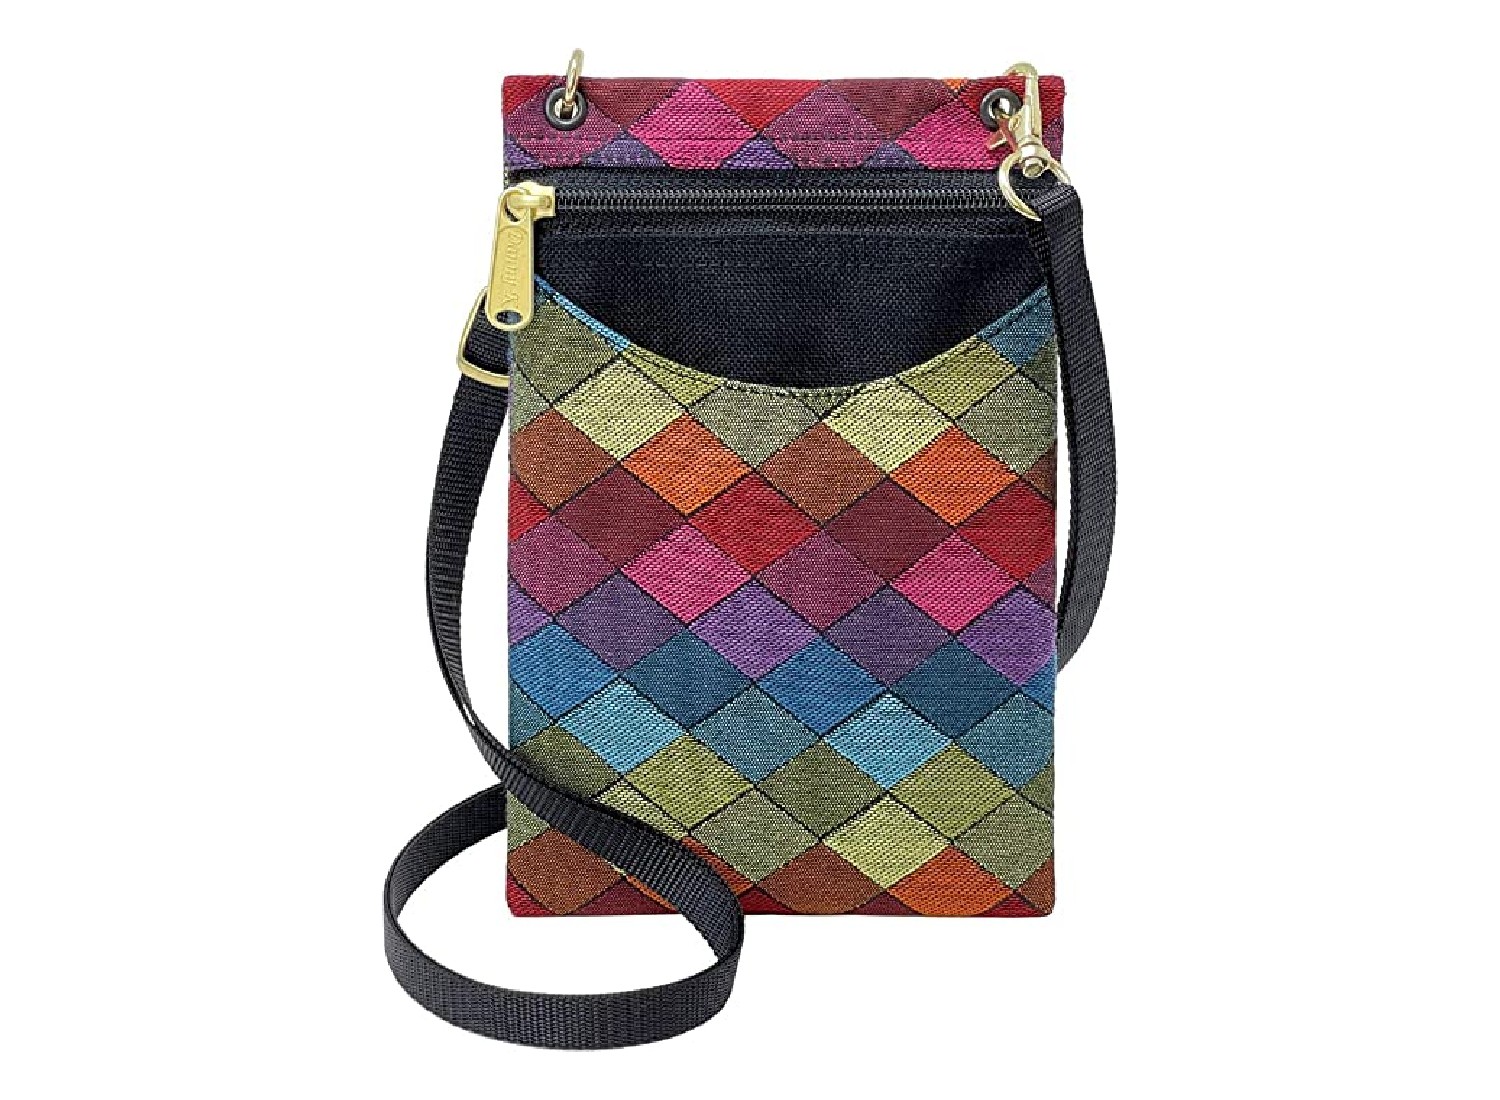 Phone Bag Purse Festival Bag Cell Phone Crossbody Wallet - Etsy in 2023 |  Purses and bags, Phone bag, Crossbody wallet